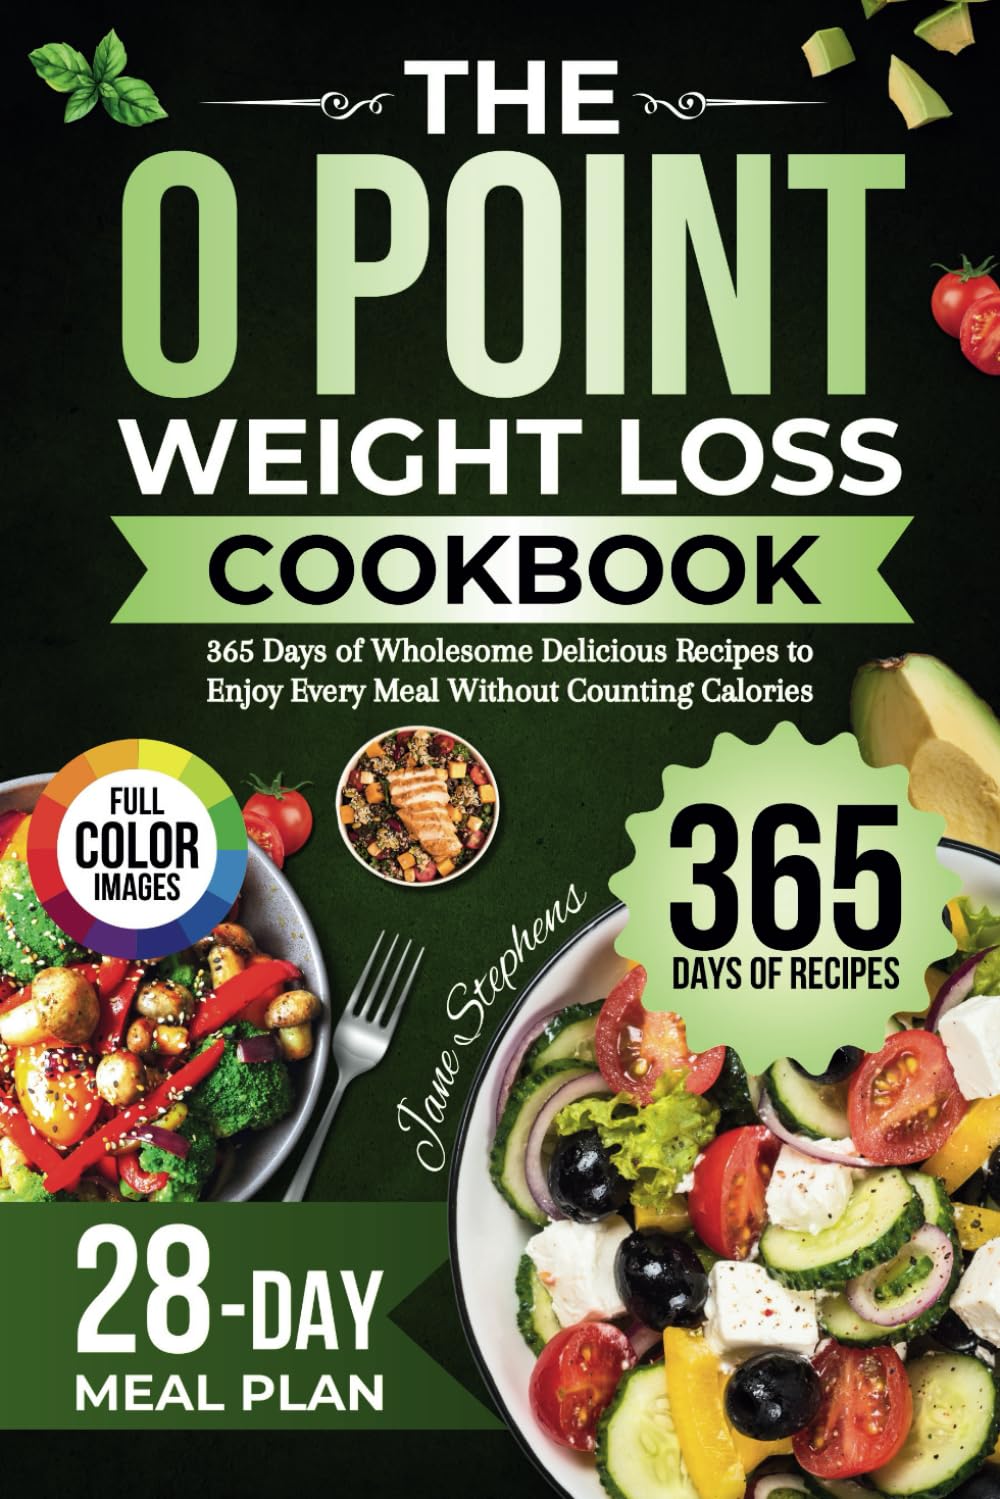 "0 Point Weight Loss Cookbook"